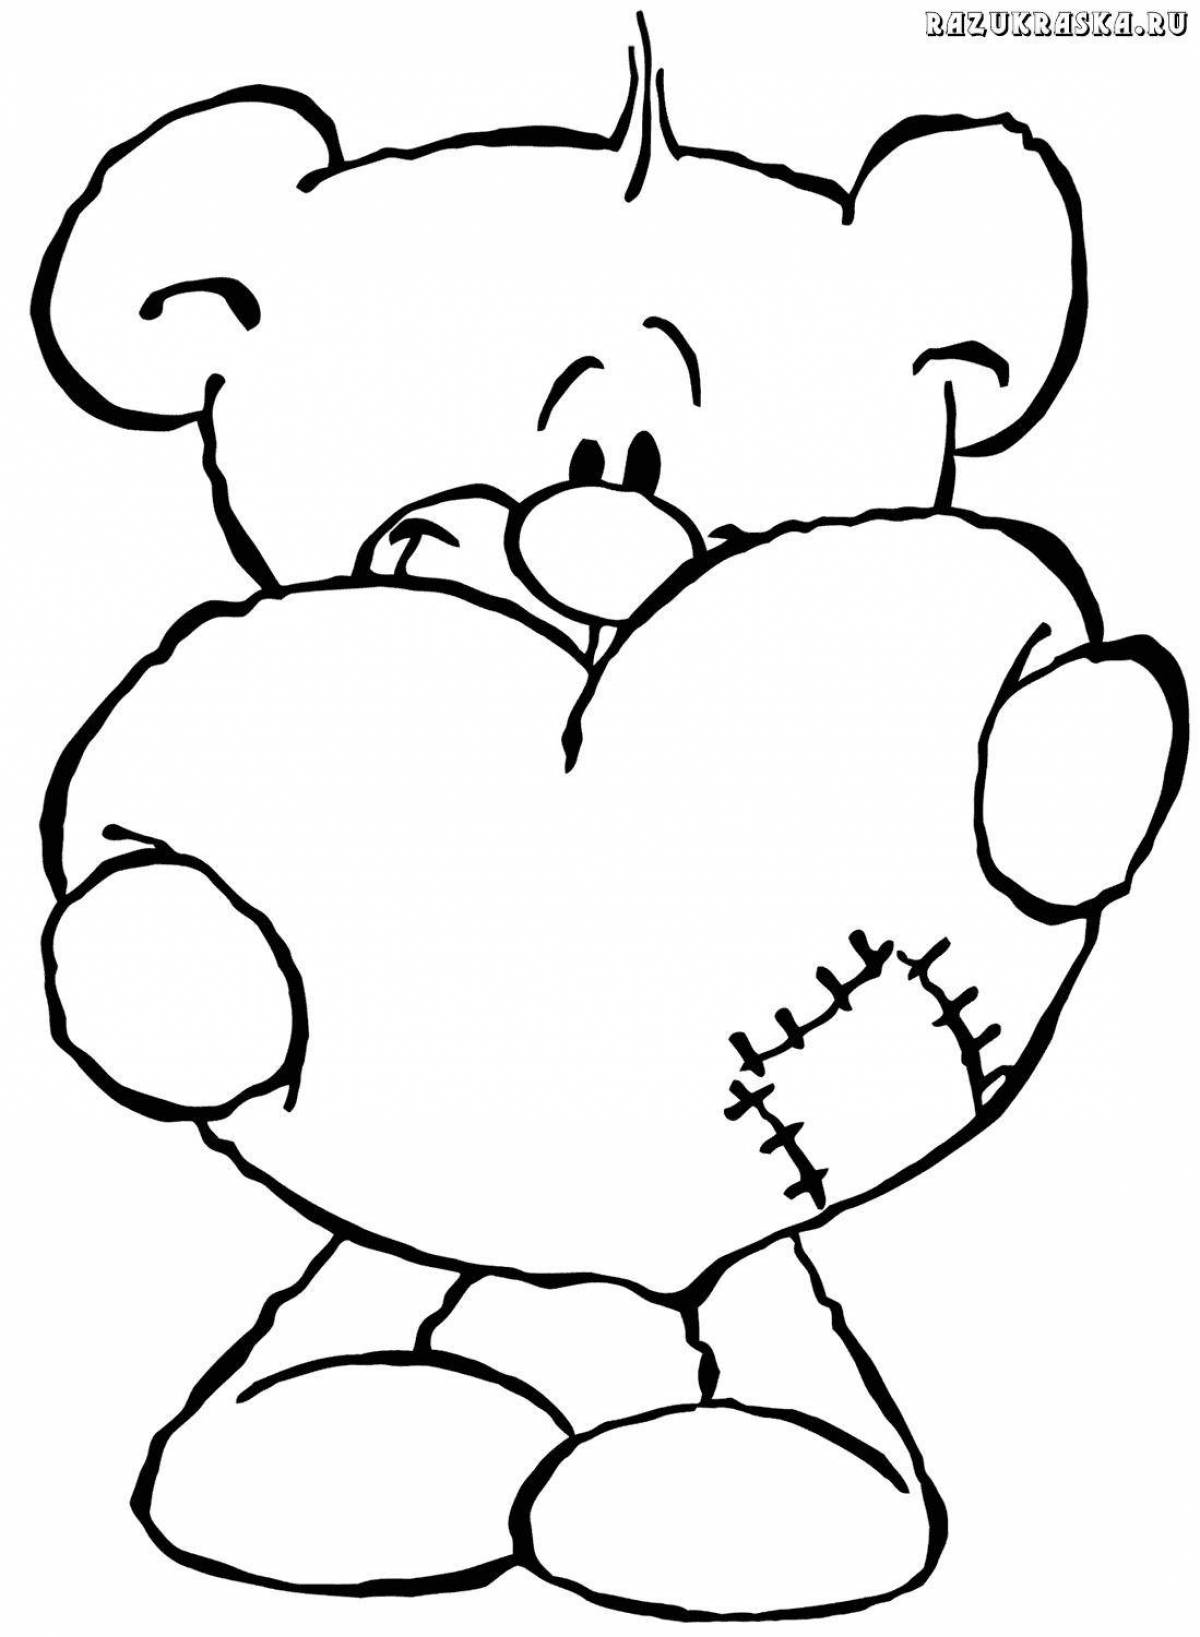 Amazing bear with a heart coloring book